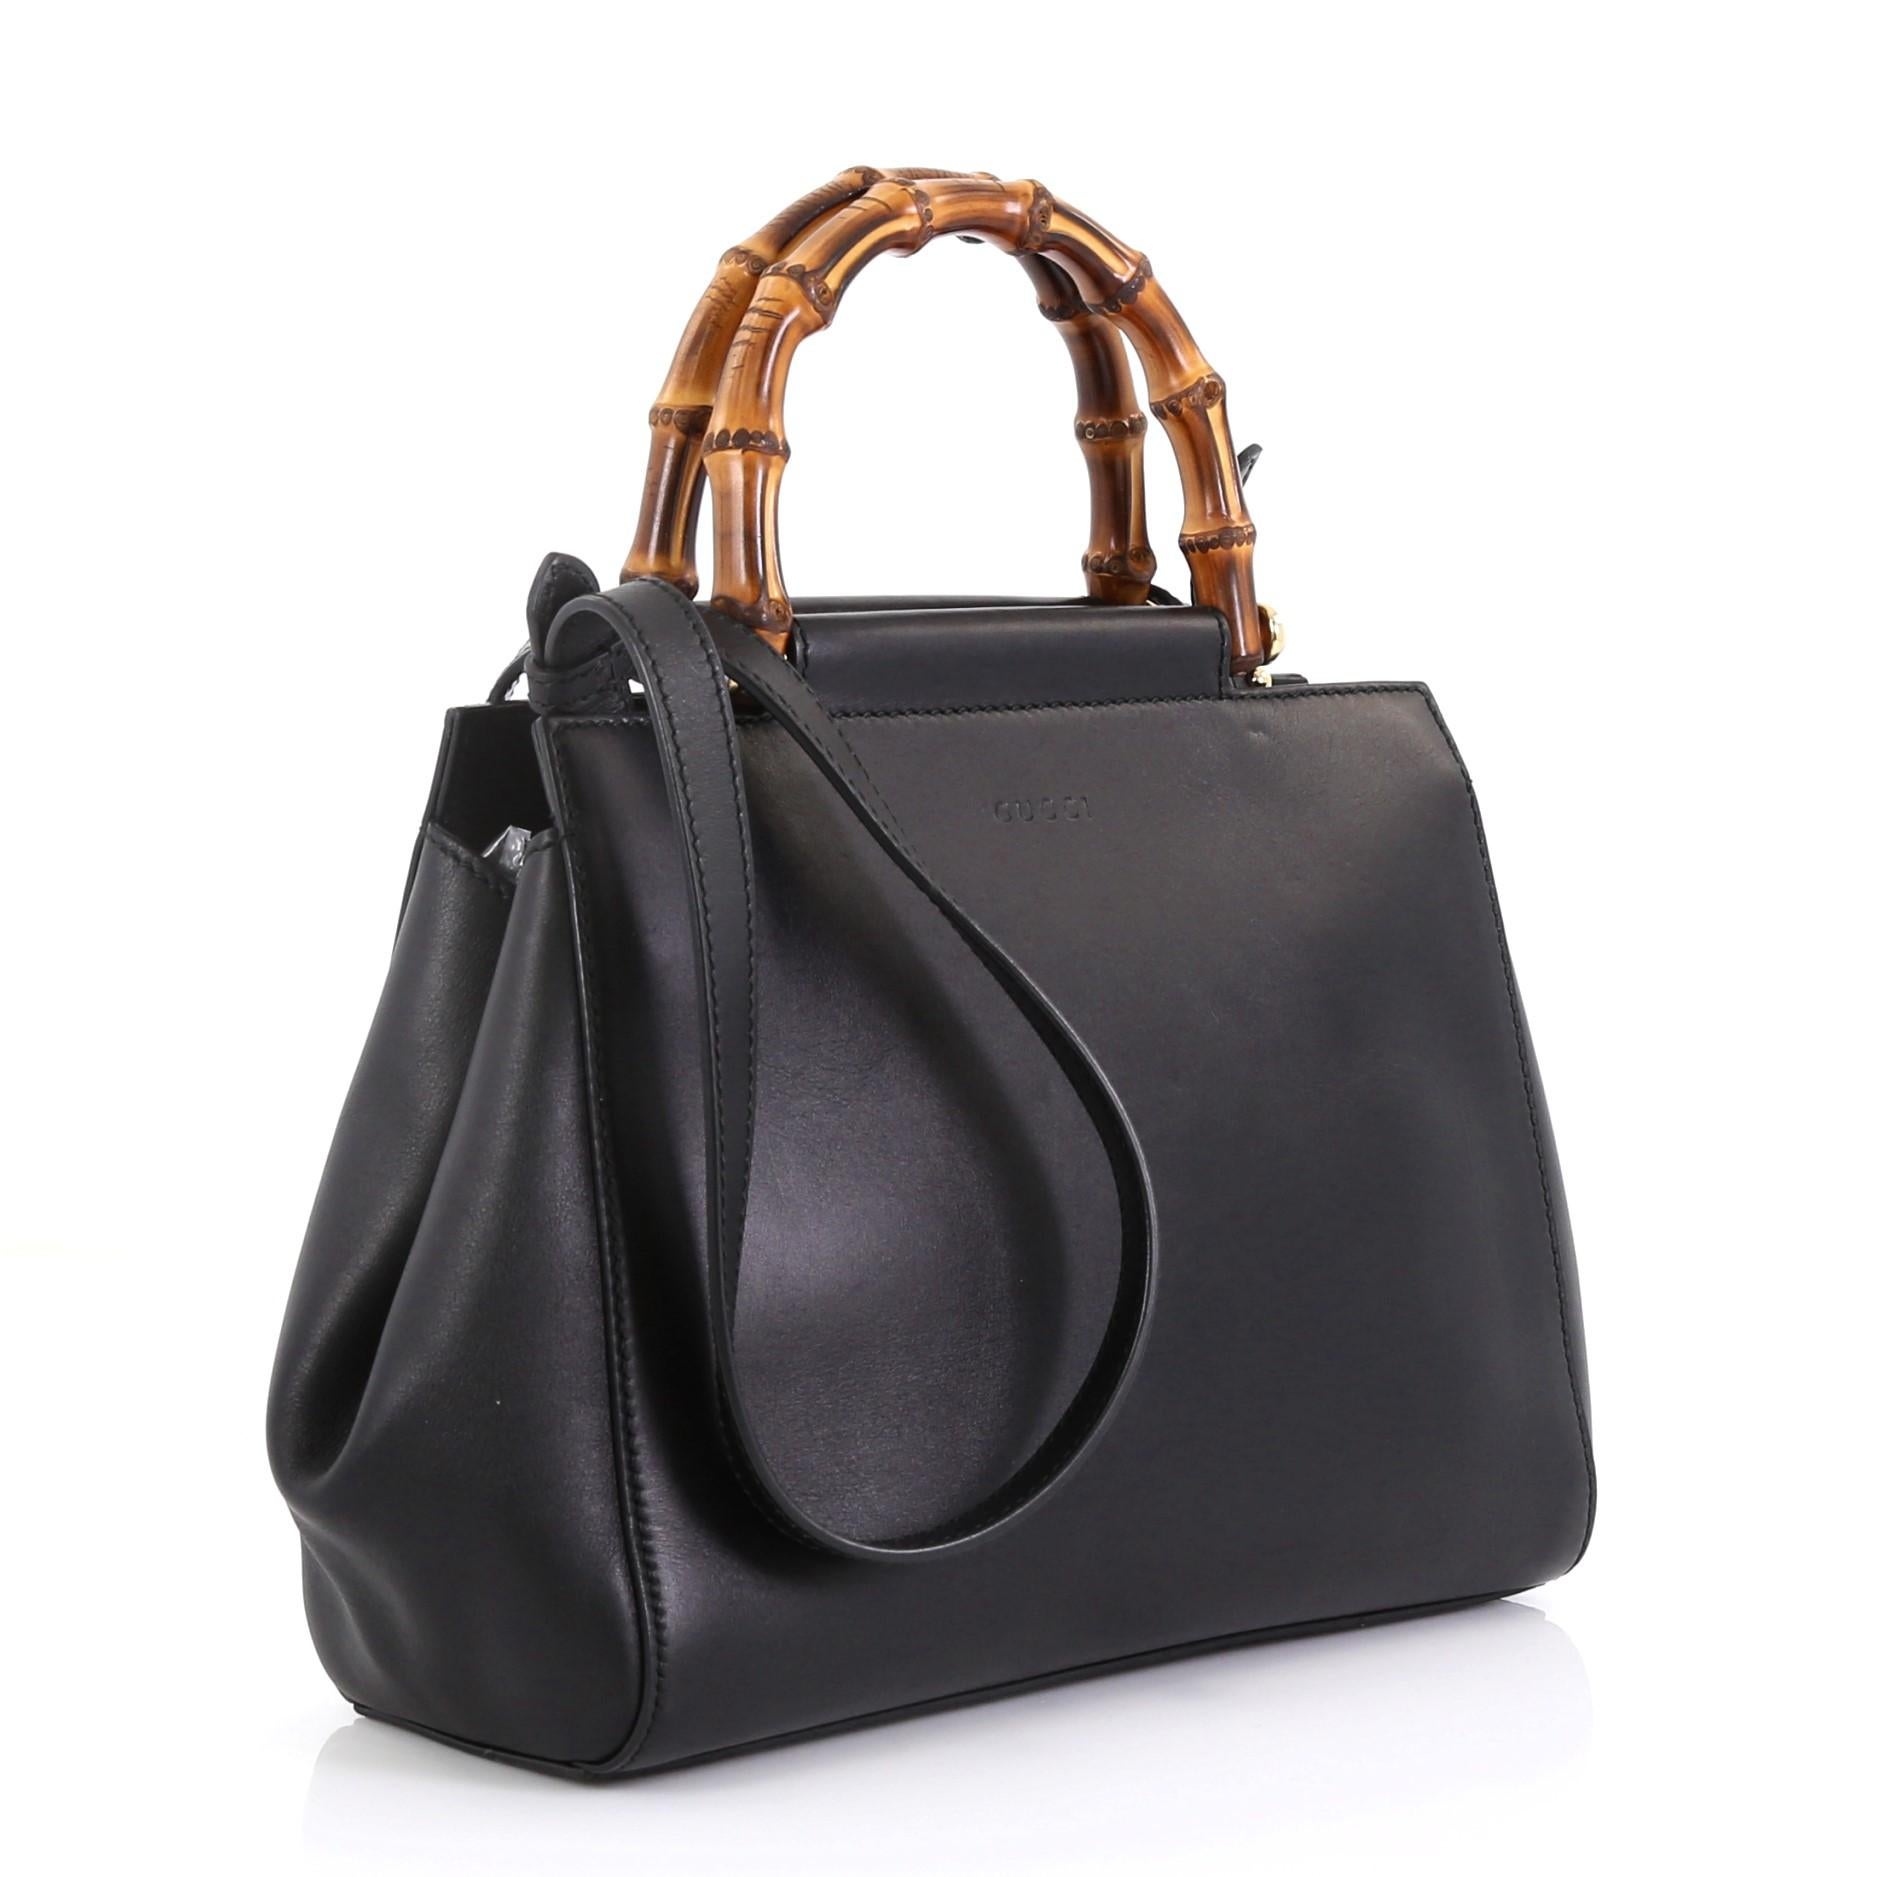 This Gucci Nymphaea Tote Leather Small, crafted in black leather, features a leather shoulder strap, bamboo handle with pearls, and gold-tone hardware accents. Its snap closure opens to a neutral microfiber interior with zip and slip pockets